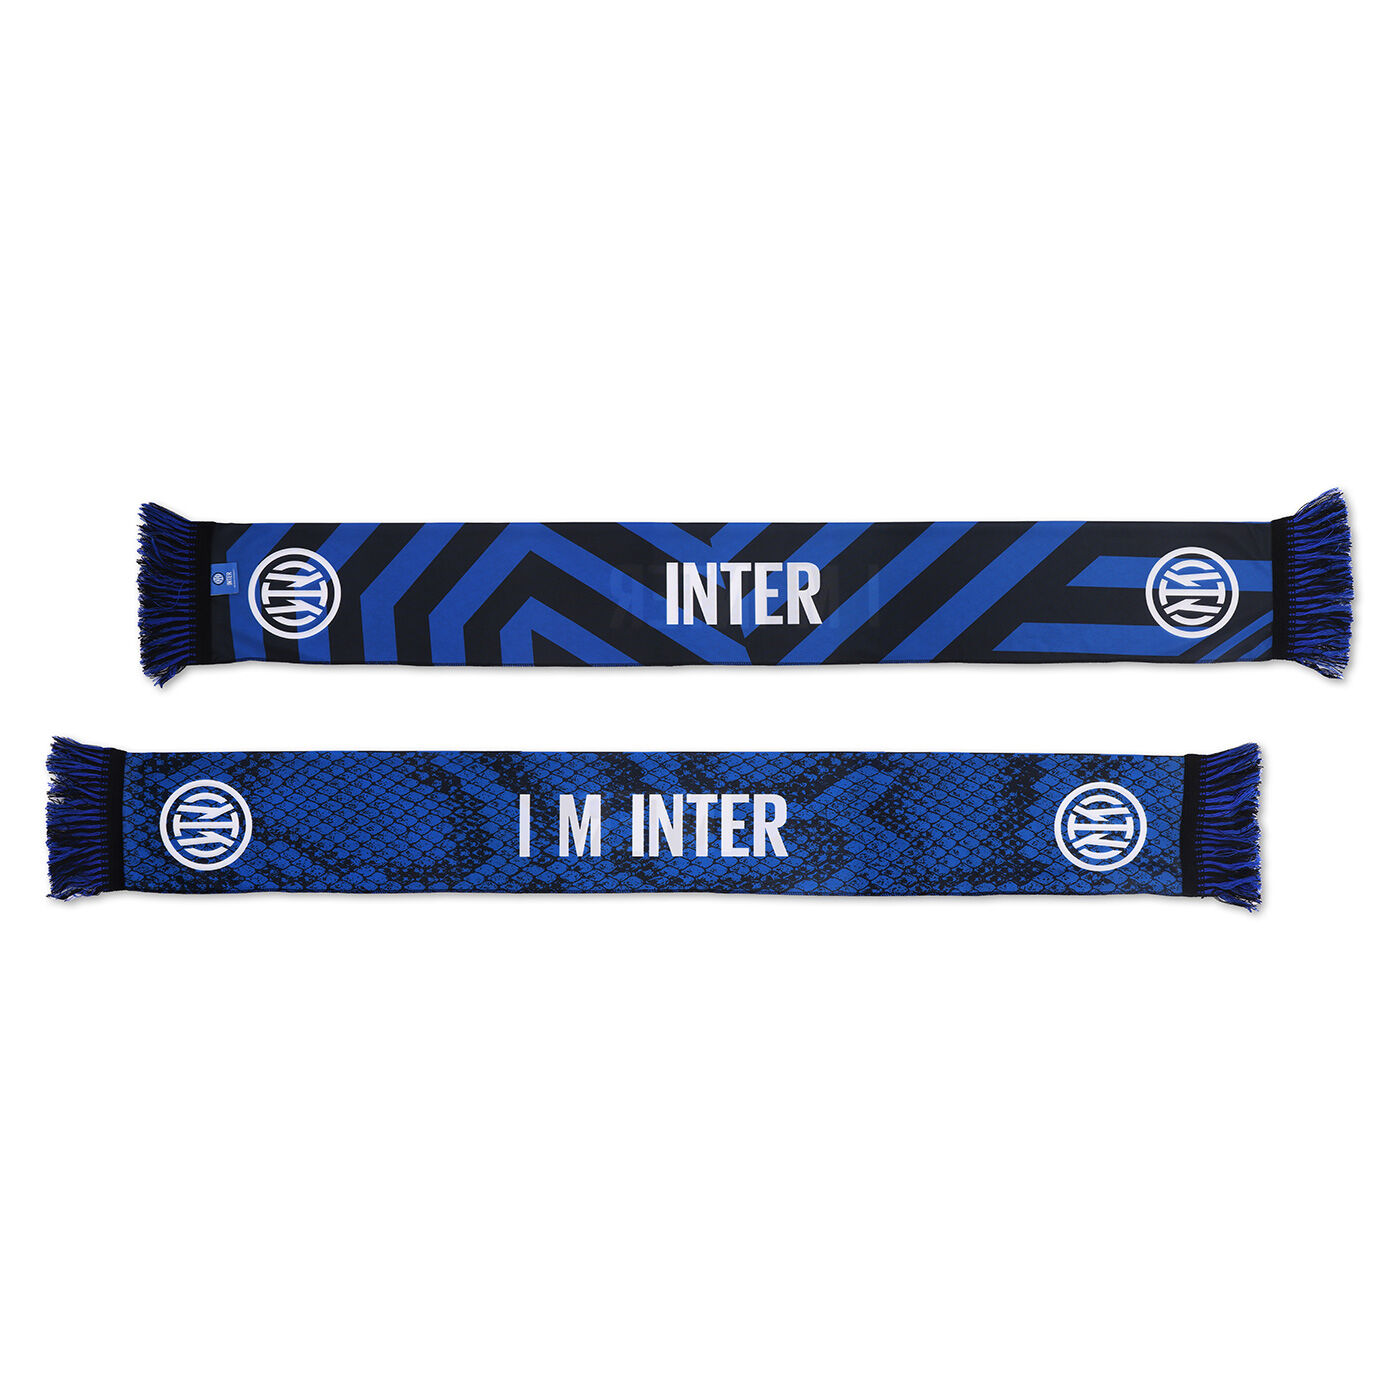 Image IM INTER FAN TWO-SIDED SCARF